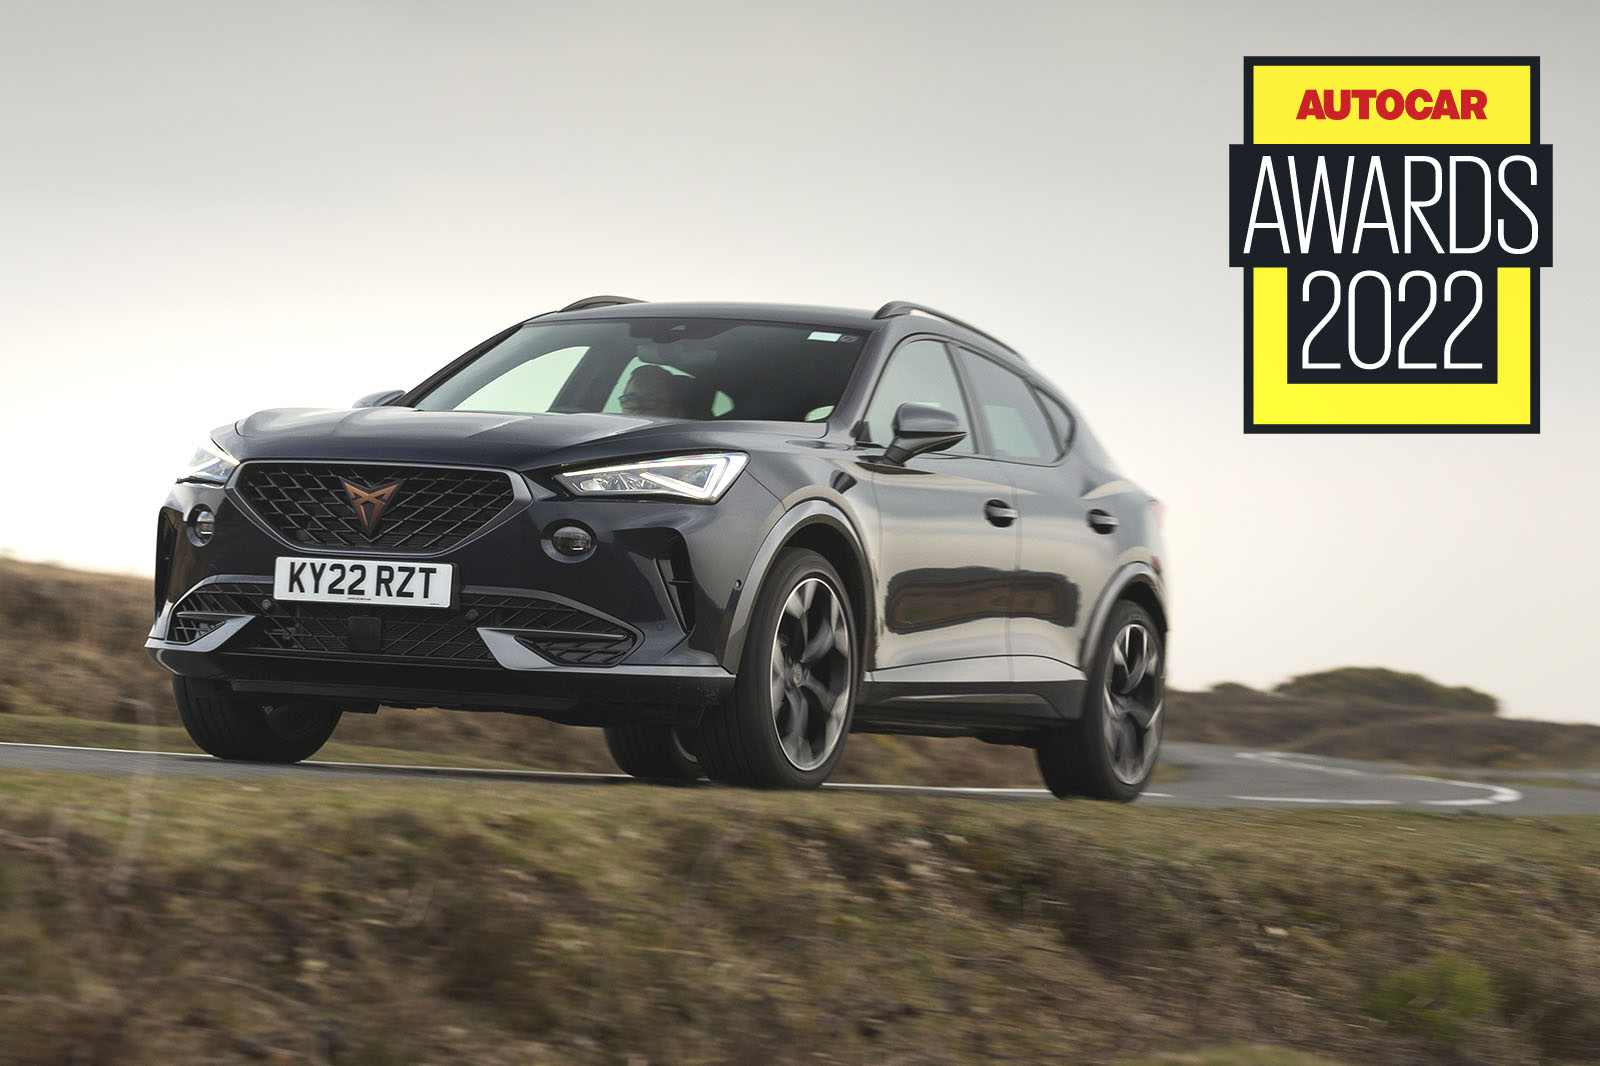 Autocar Awards 2022: Cupra Formentor voted best all-rounder